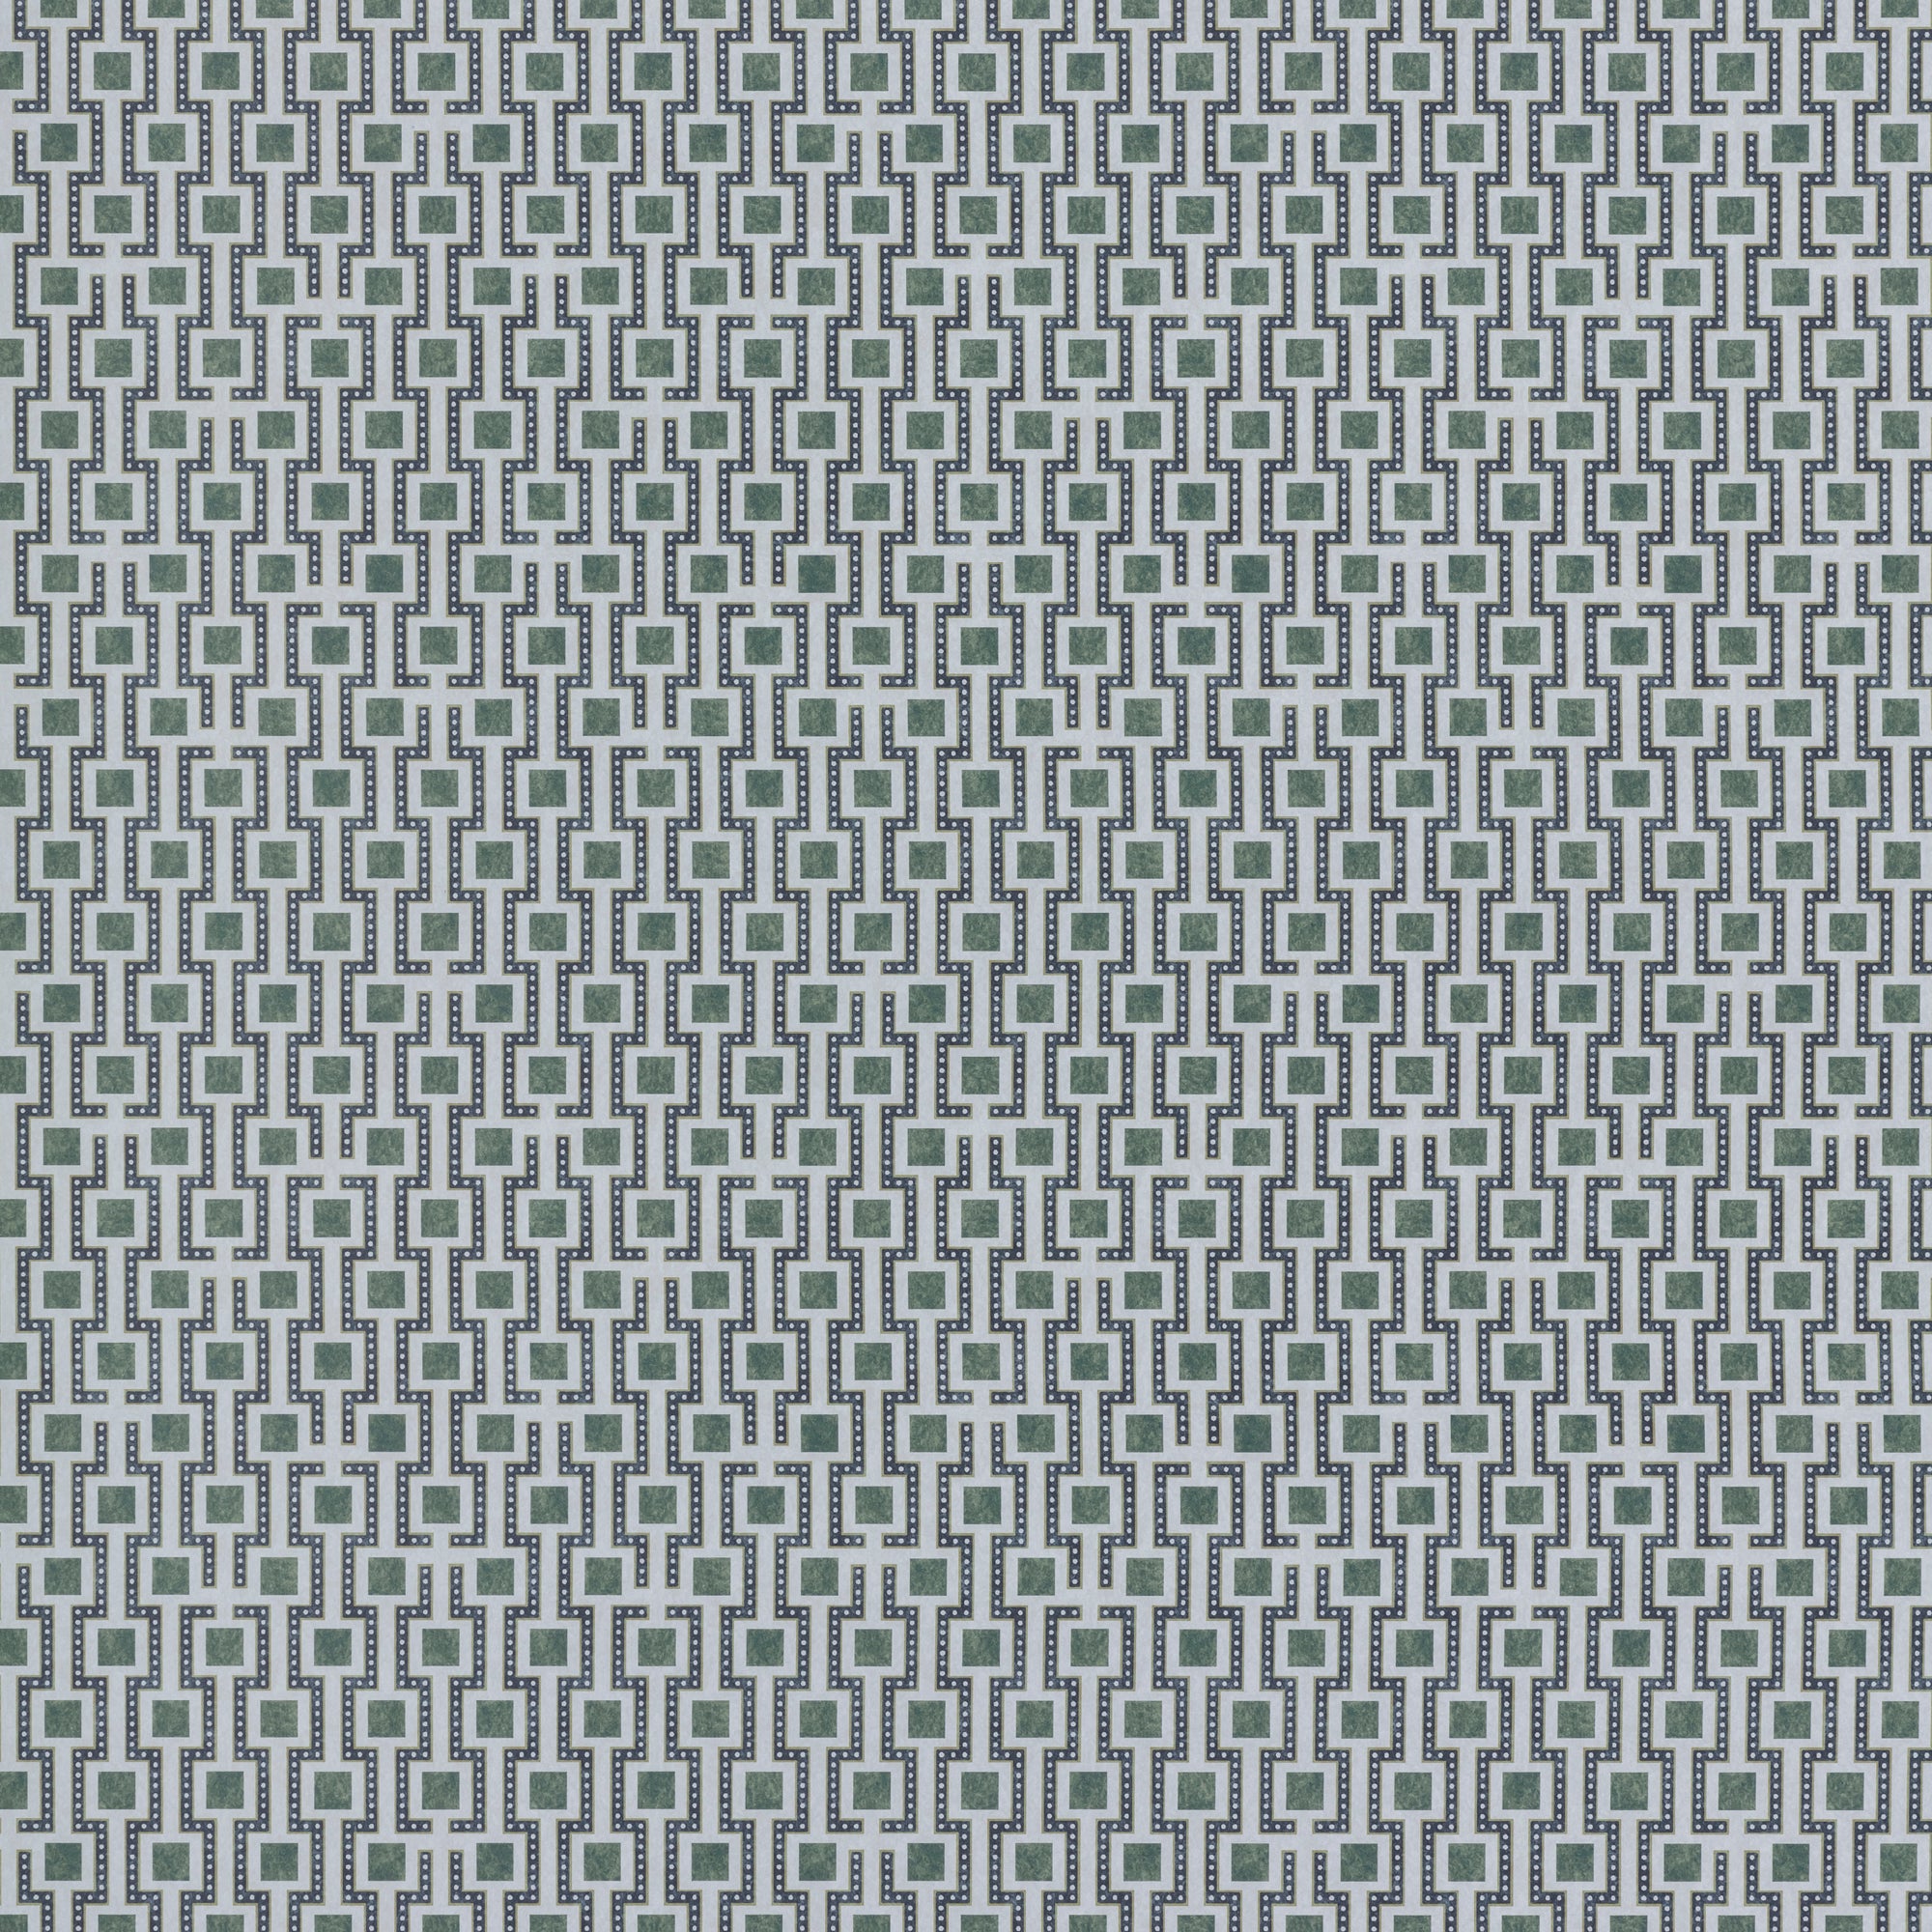 Wallpaper panel in a geometric grid print in shades of green, blue and gray.